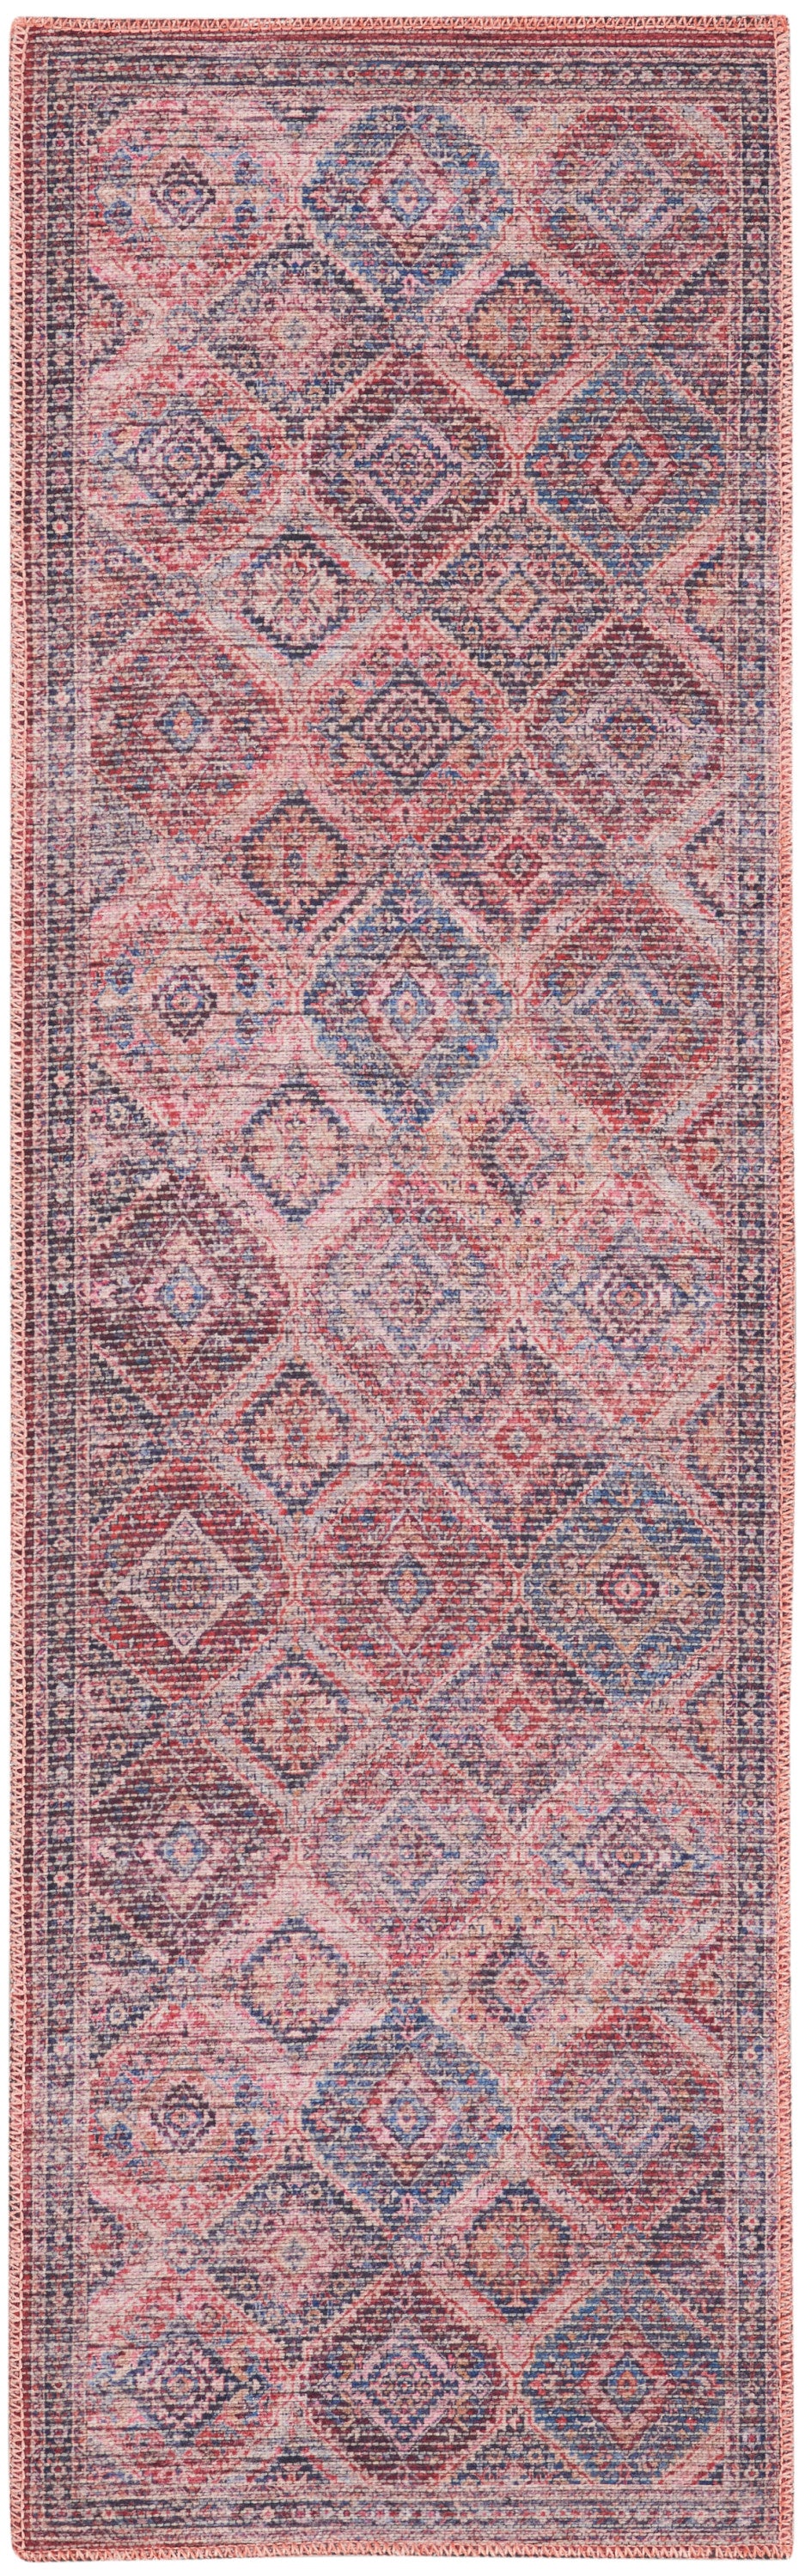 Nicole Curtis Machine Washable Series 1 SR103 Multicolor  Traditional Machinemade Rug